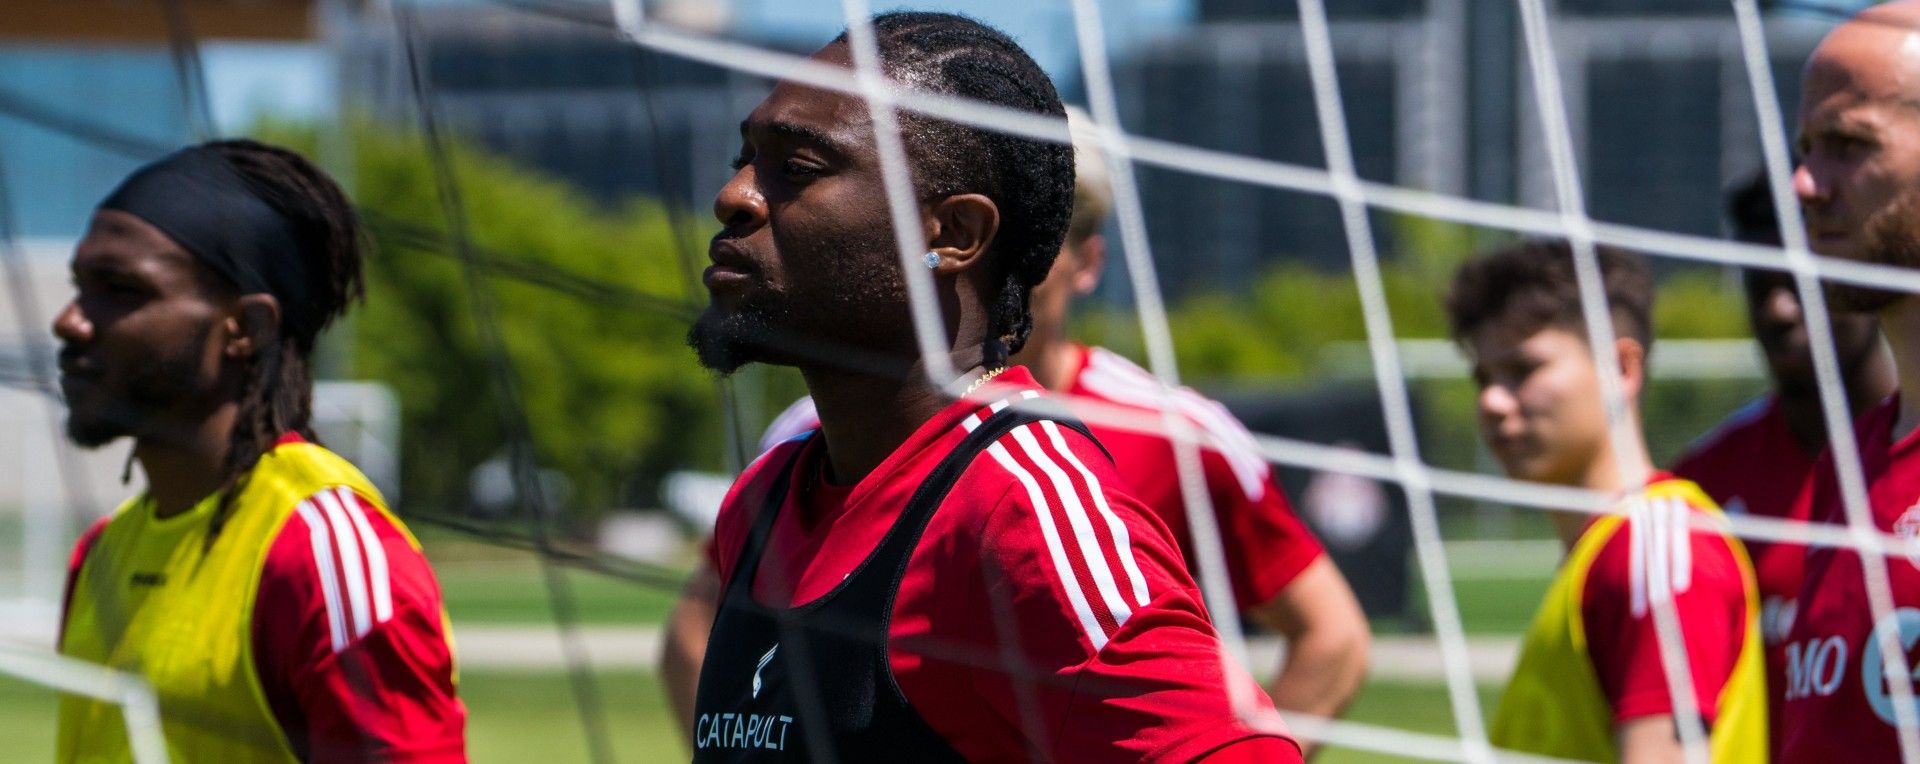 Random thoughts on TFC: Akinola could provide spark up front